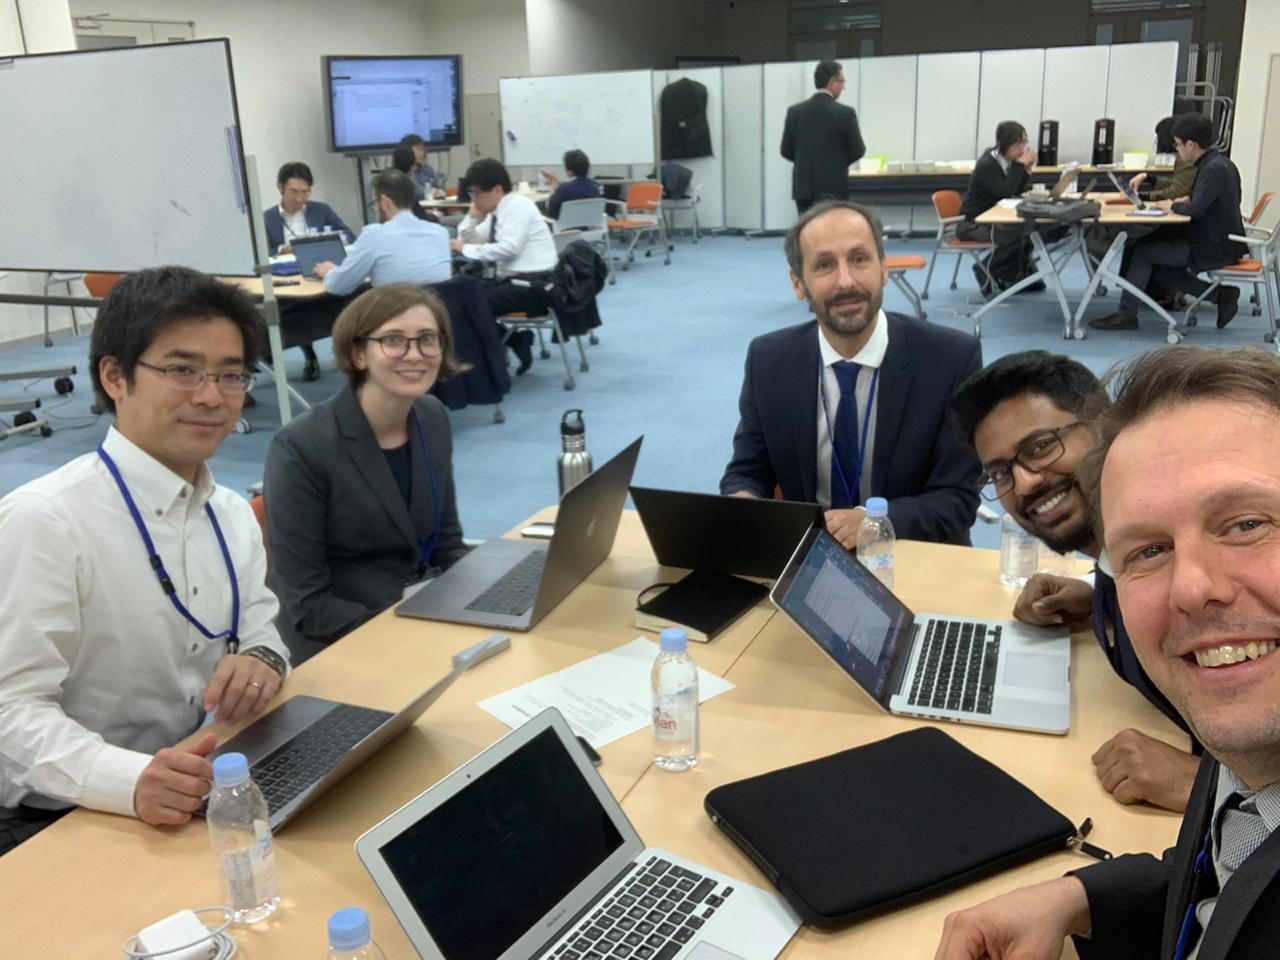 Phonetics - First joint workshop between University of Zurich and National Institute of Informatics, Tokyo. 